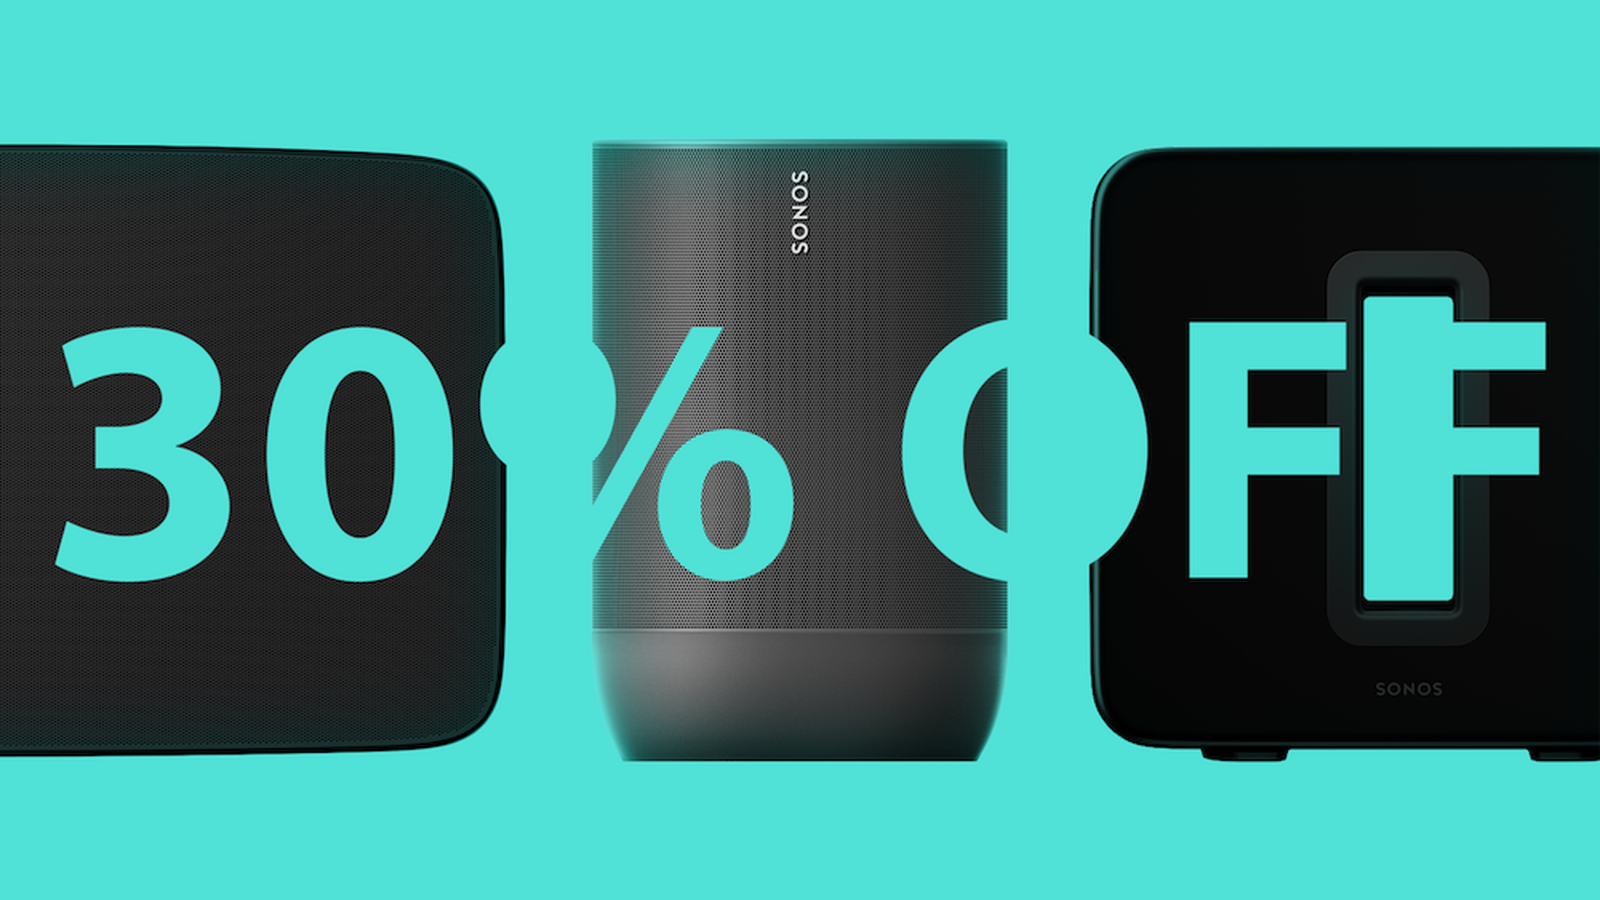 Deals: Sonos Offers 30% Off Sitewide for Healthcare Workers Amazon Discounts iPhone Cases - MacRumors